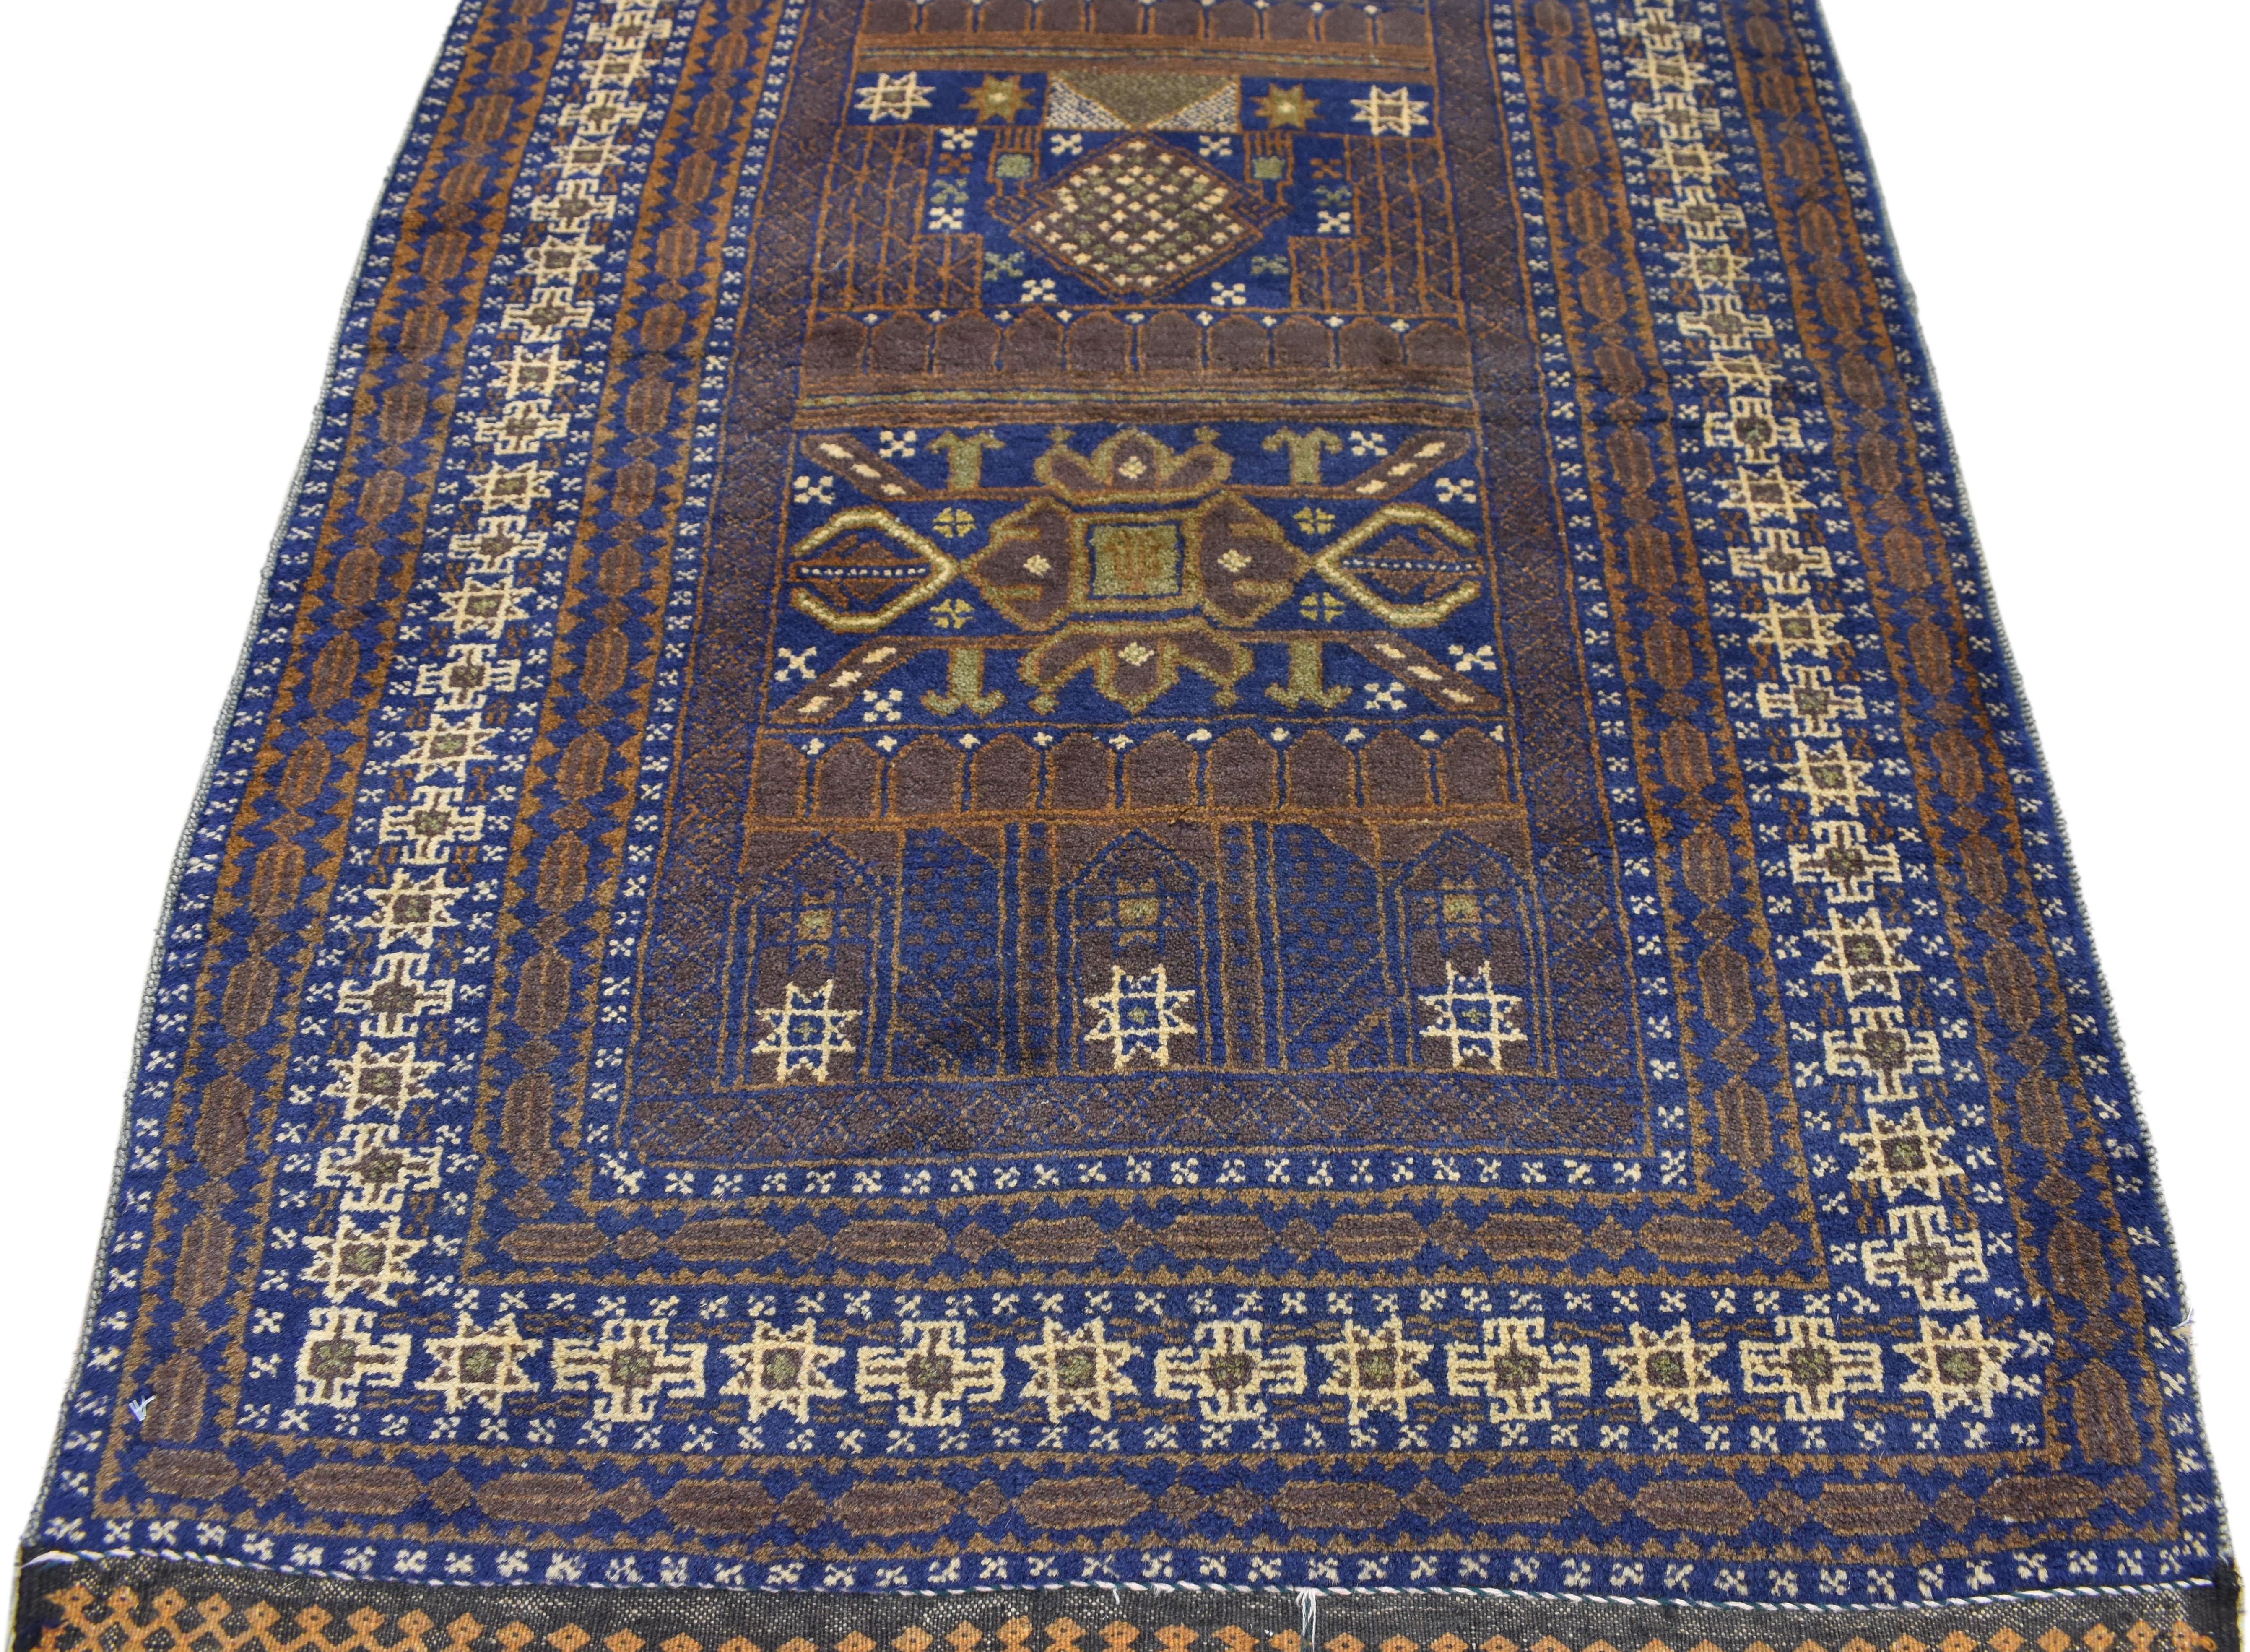 72102 Vintage Afghani Hallway runner with Tribal Nomadic Style. This hand knotted wool vintage Afghani runner features a compartment design with alternating panels. It is enclosed with a series of borders composed of eight-point stars flanked with